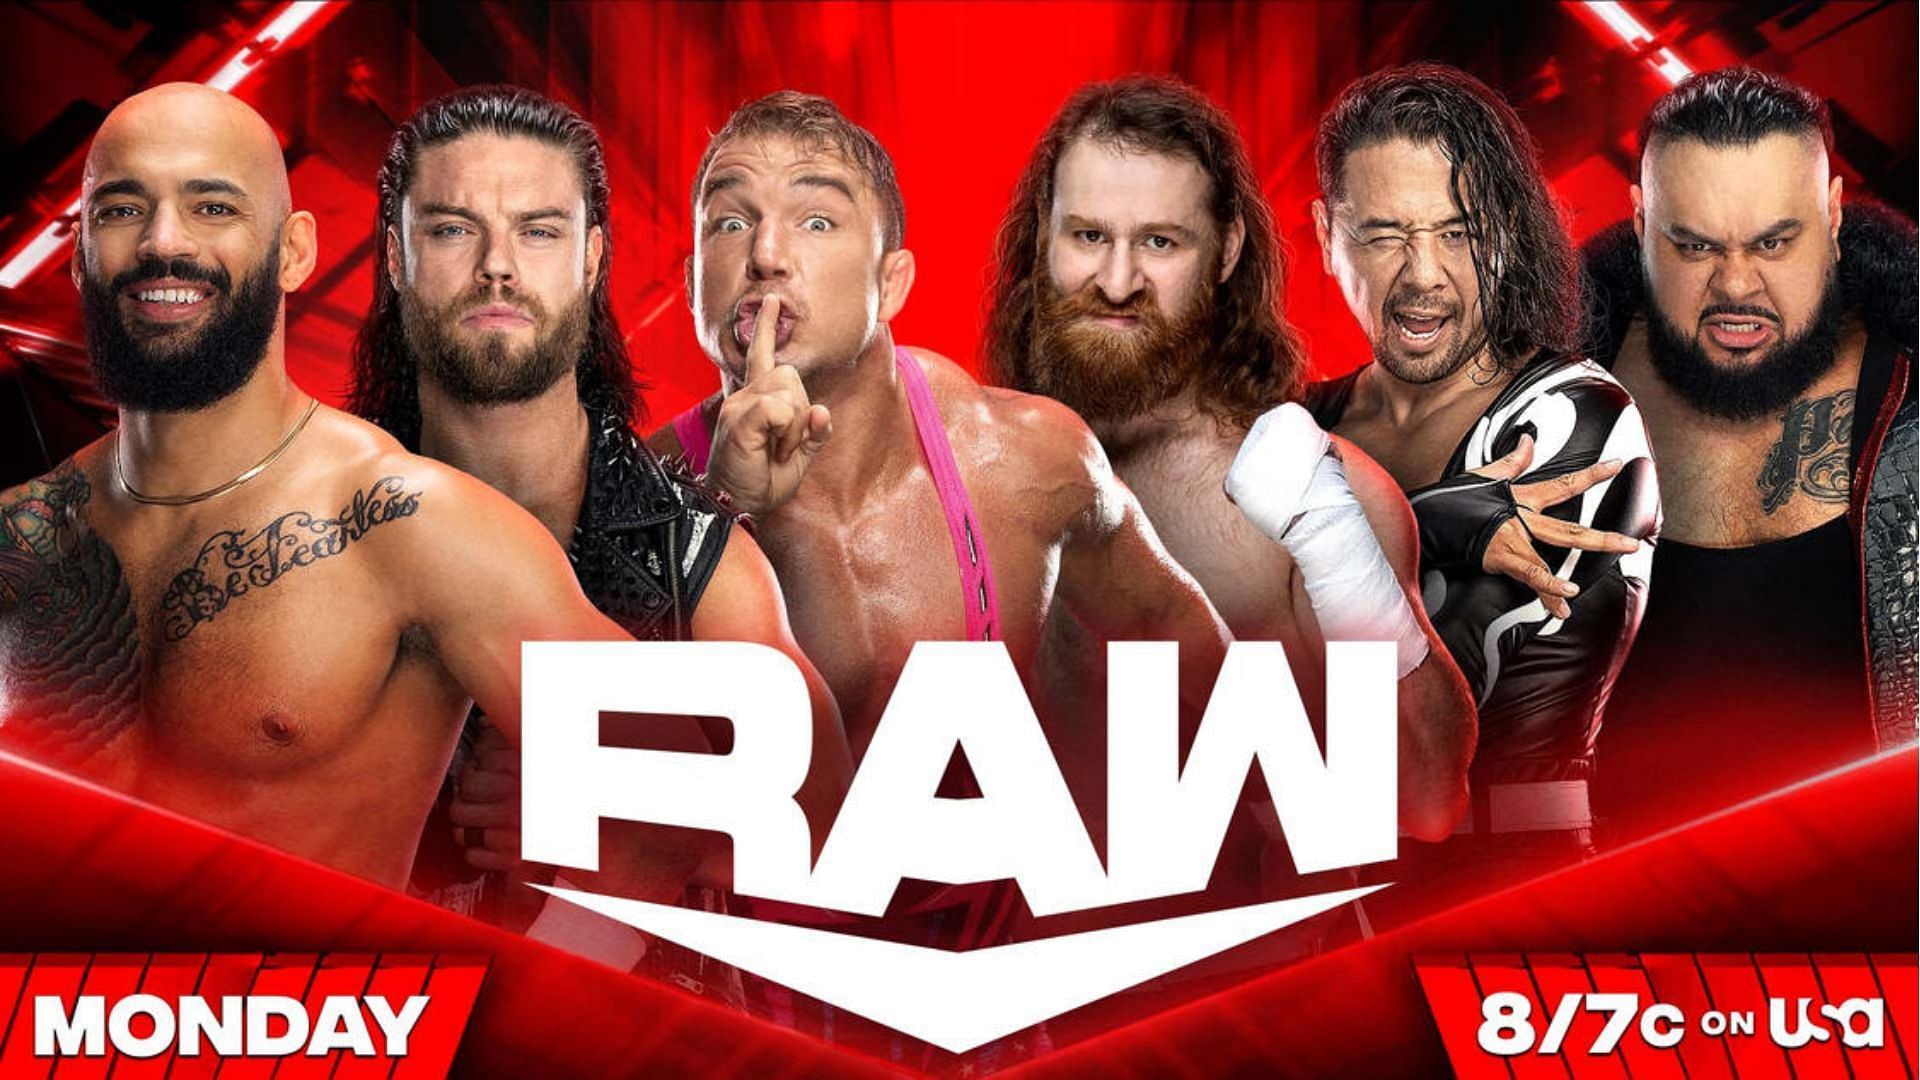 The Gauntlet match on WWE RAW will be must-see.